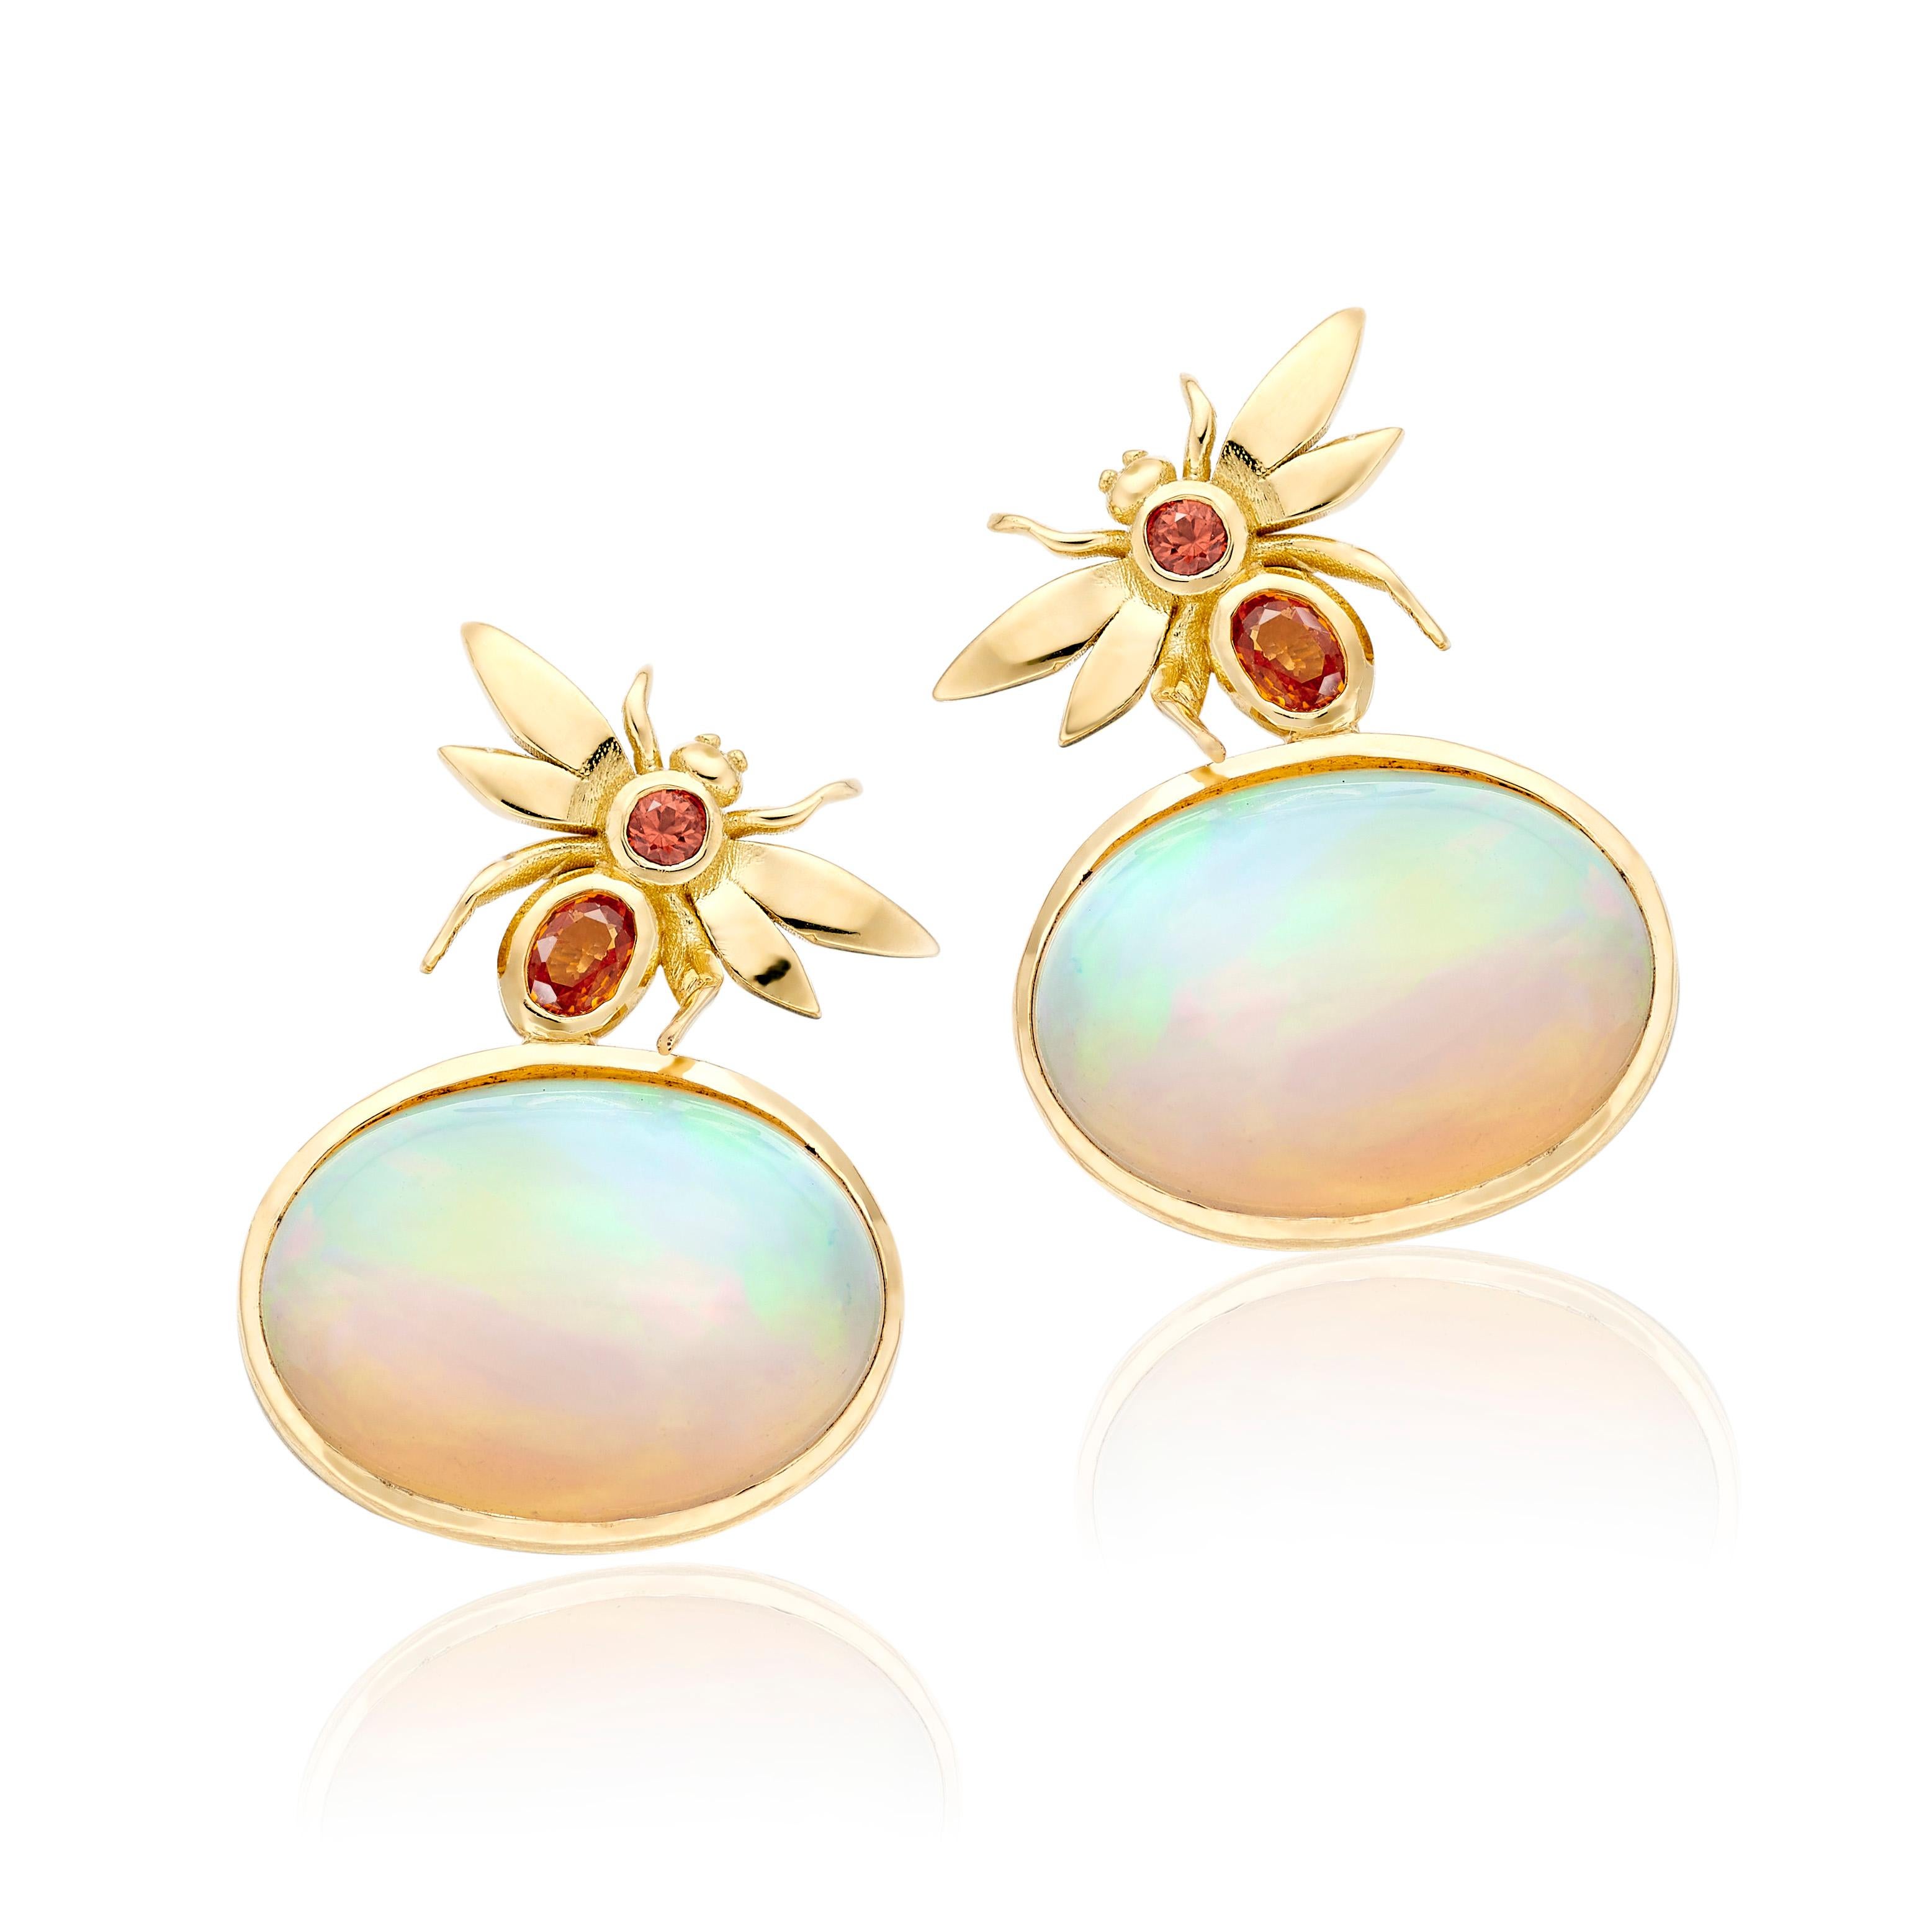 Contemporary Lilly Hastedt Mandarin Garnet and Opal Earrings For Sale